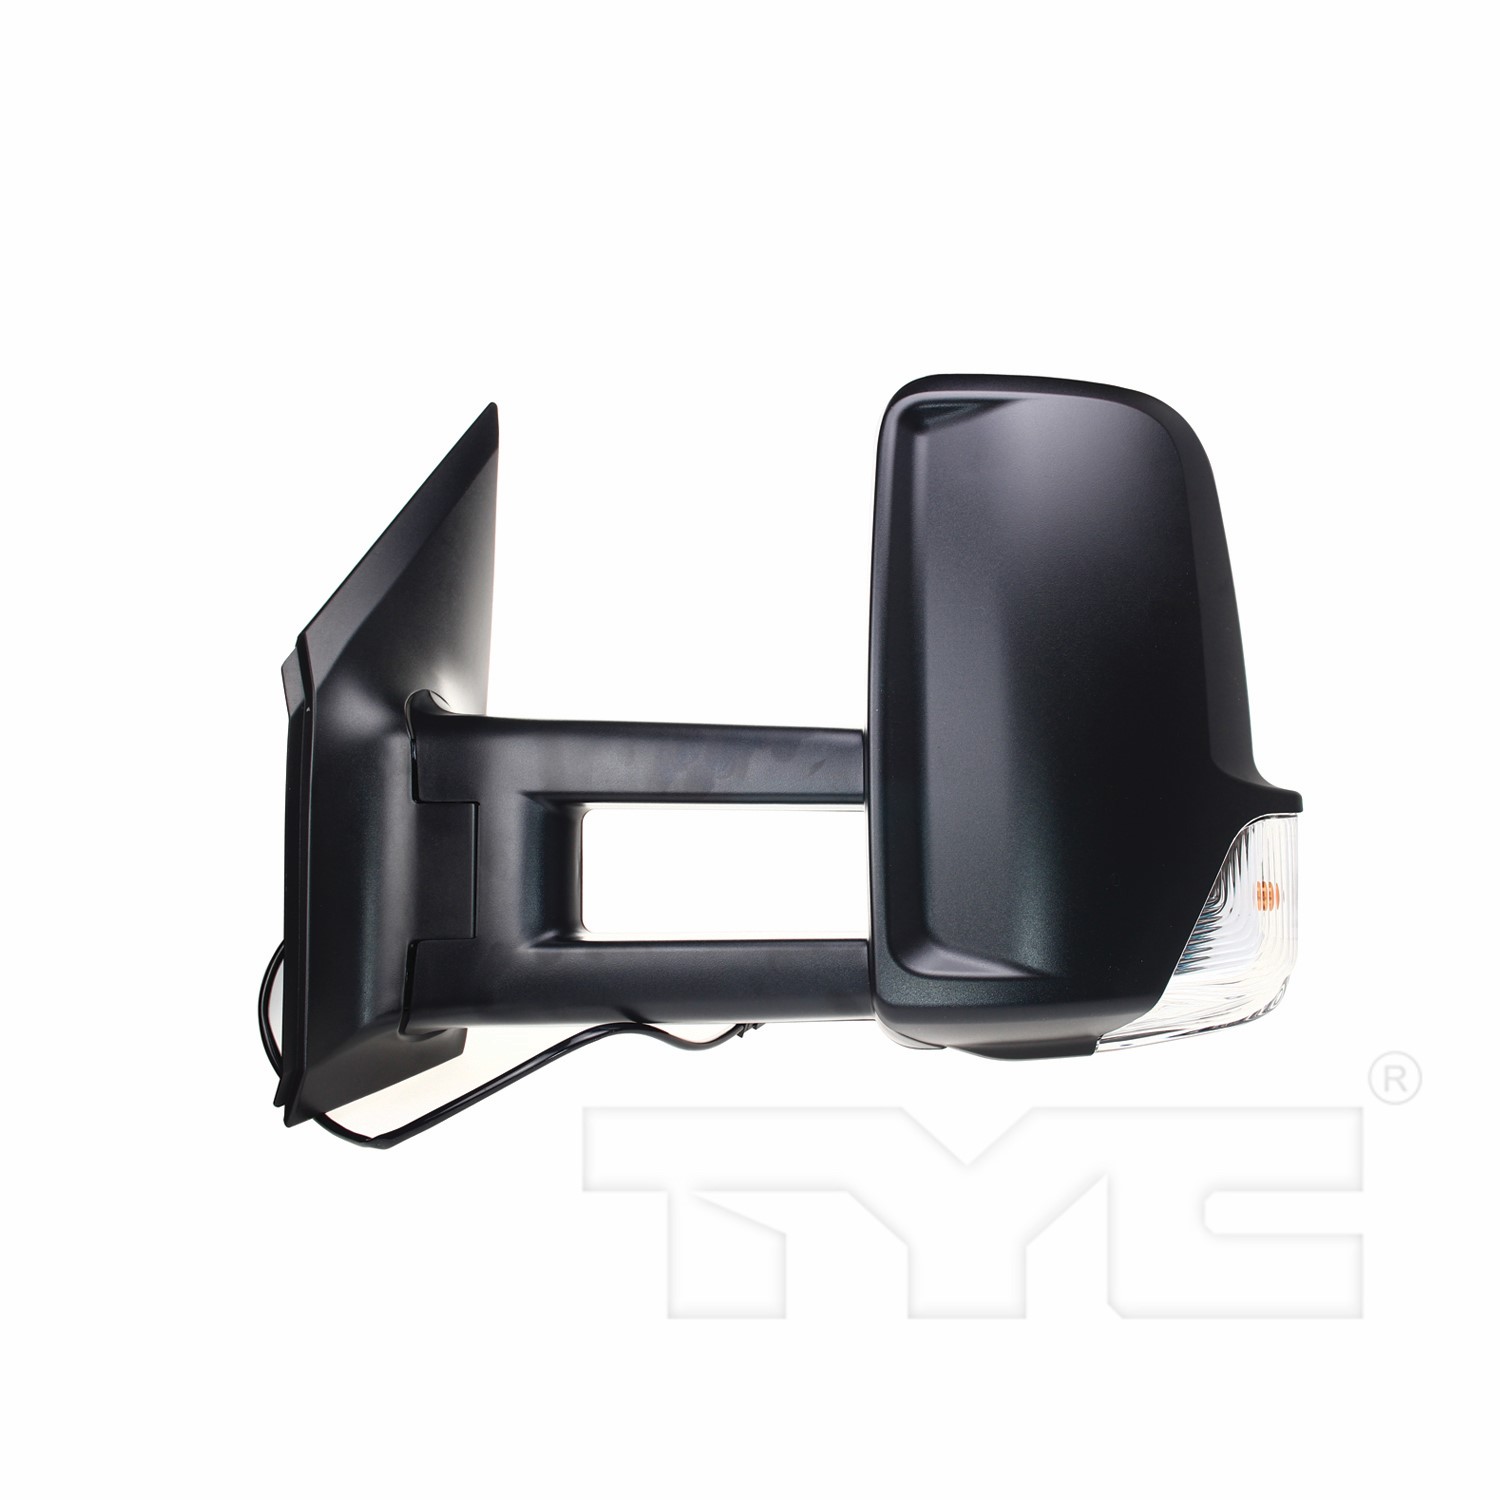 Aftermarket MIRRORS for DODGE - SPRINTER 2500, SPRINTER 2500,07-09,LT Mirror outside rear view